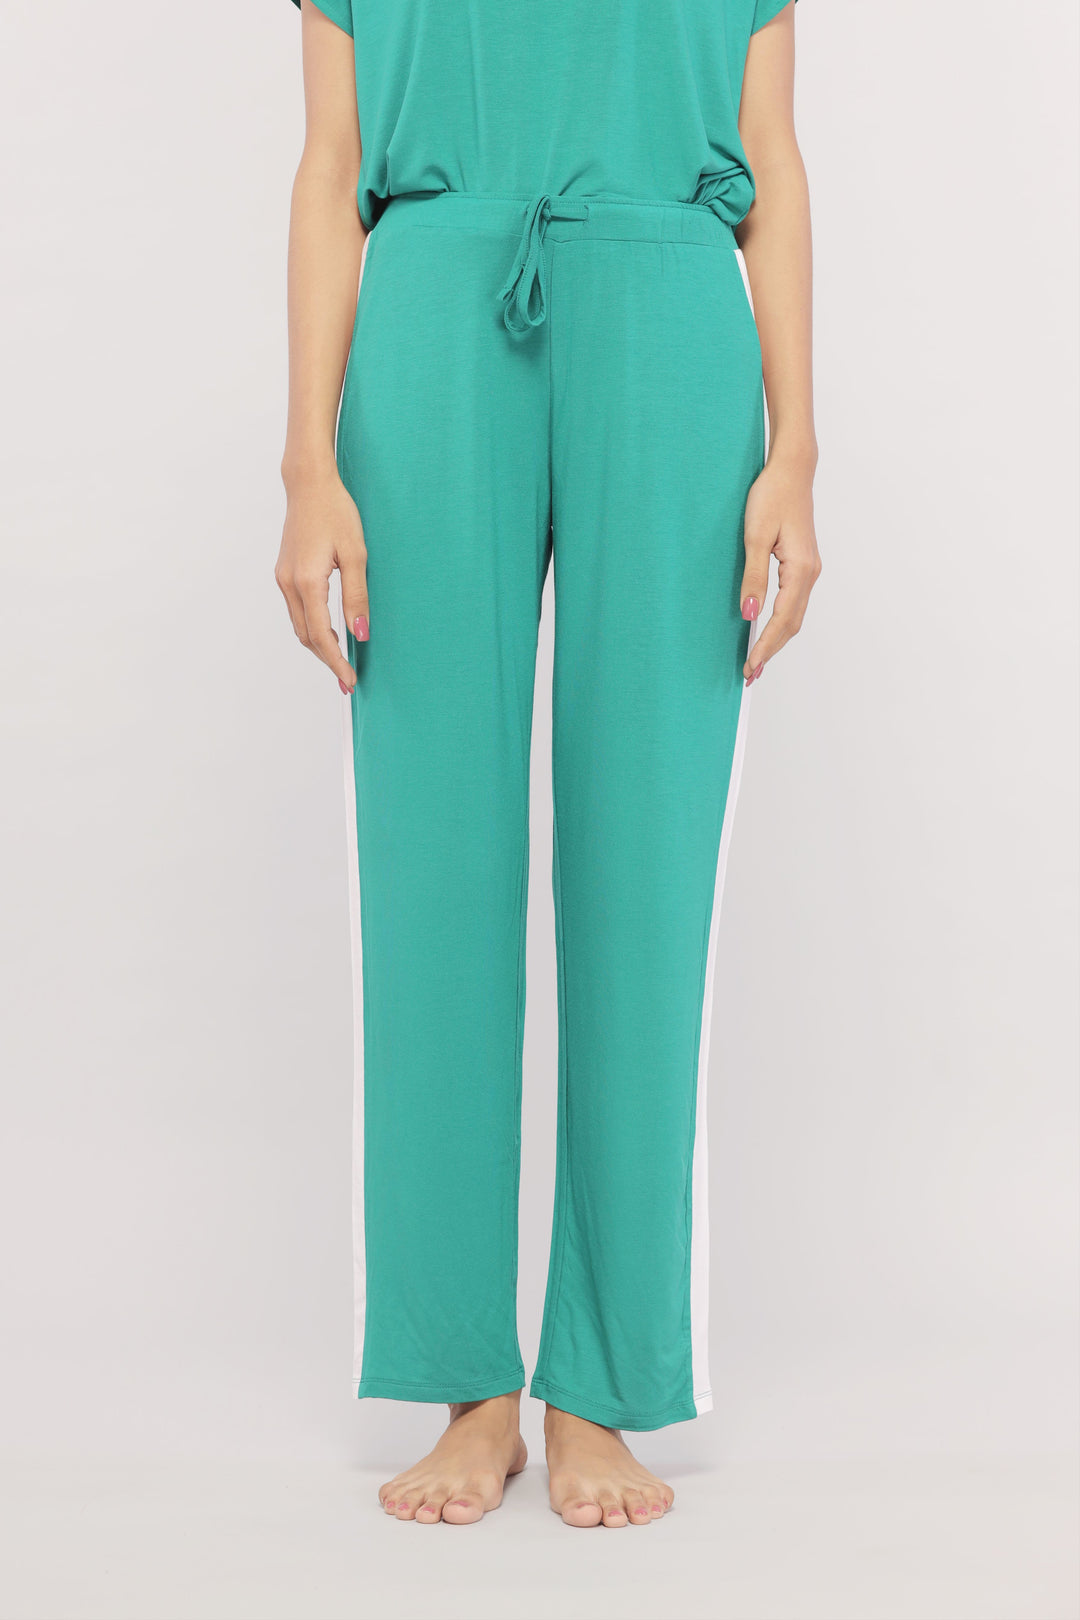 Cozy Green Lounge Pants with White Stripe – NeceSera